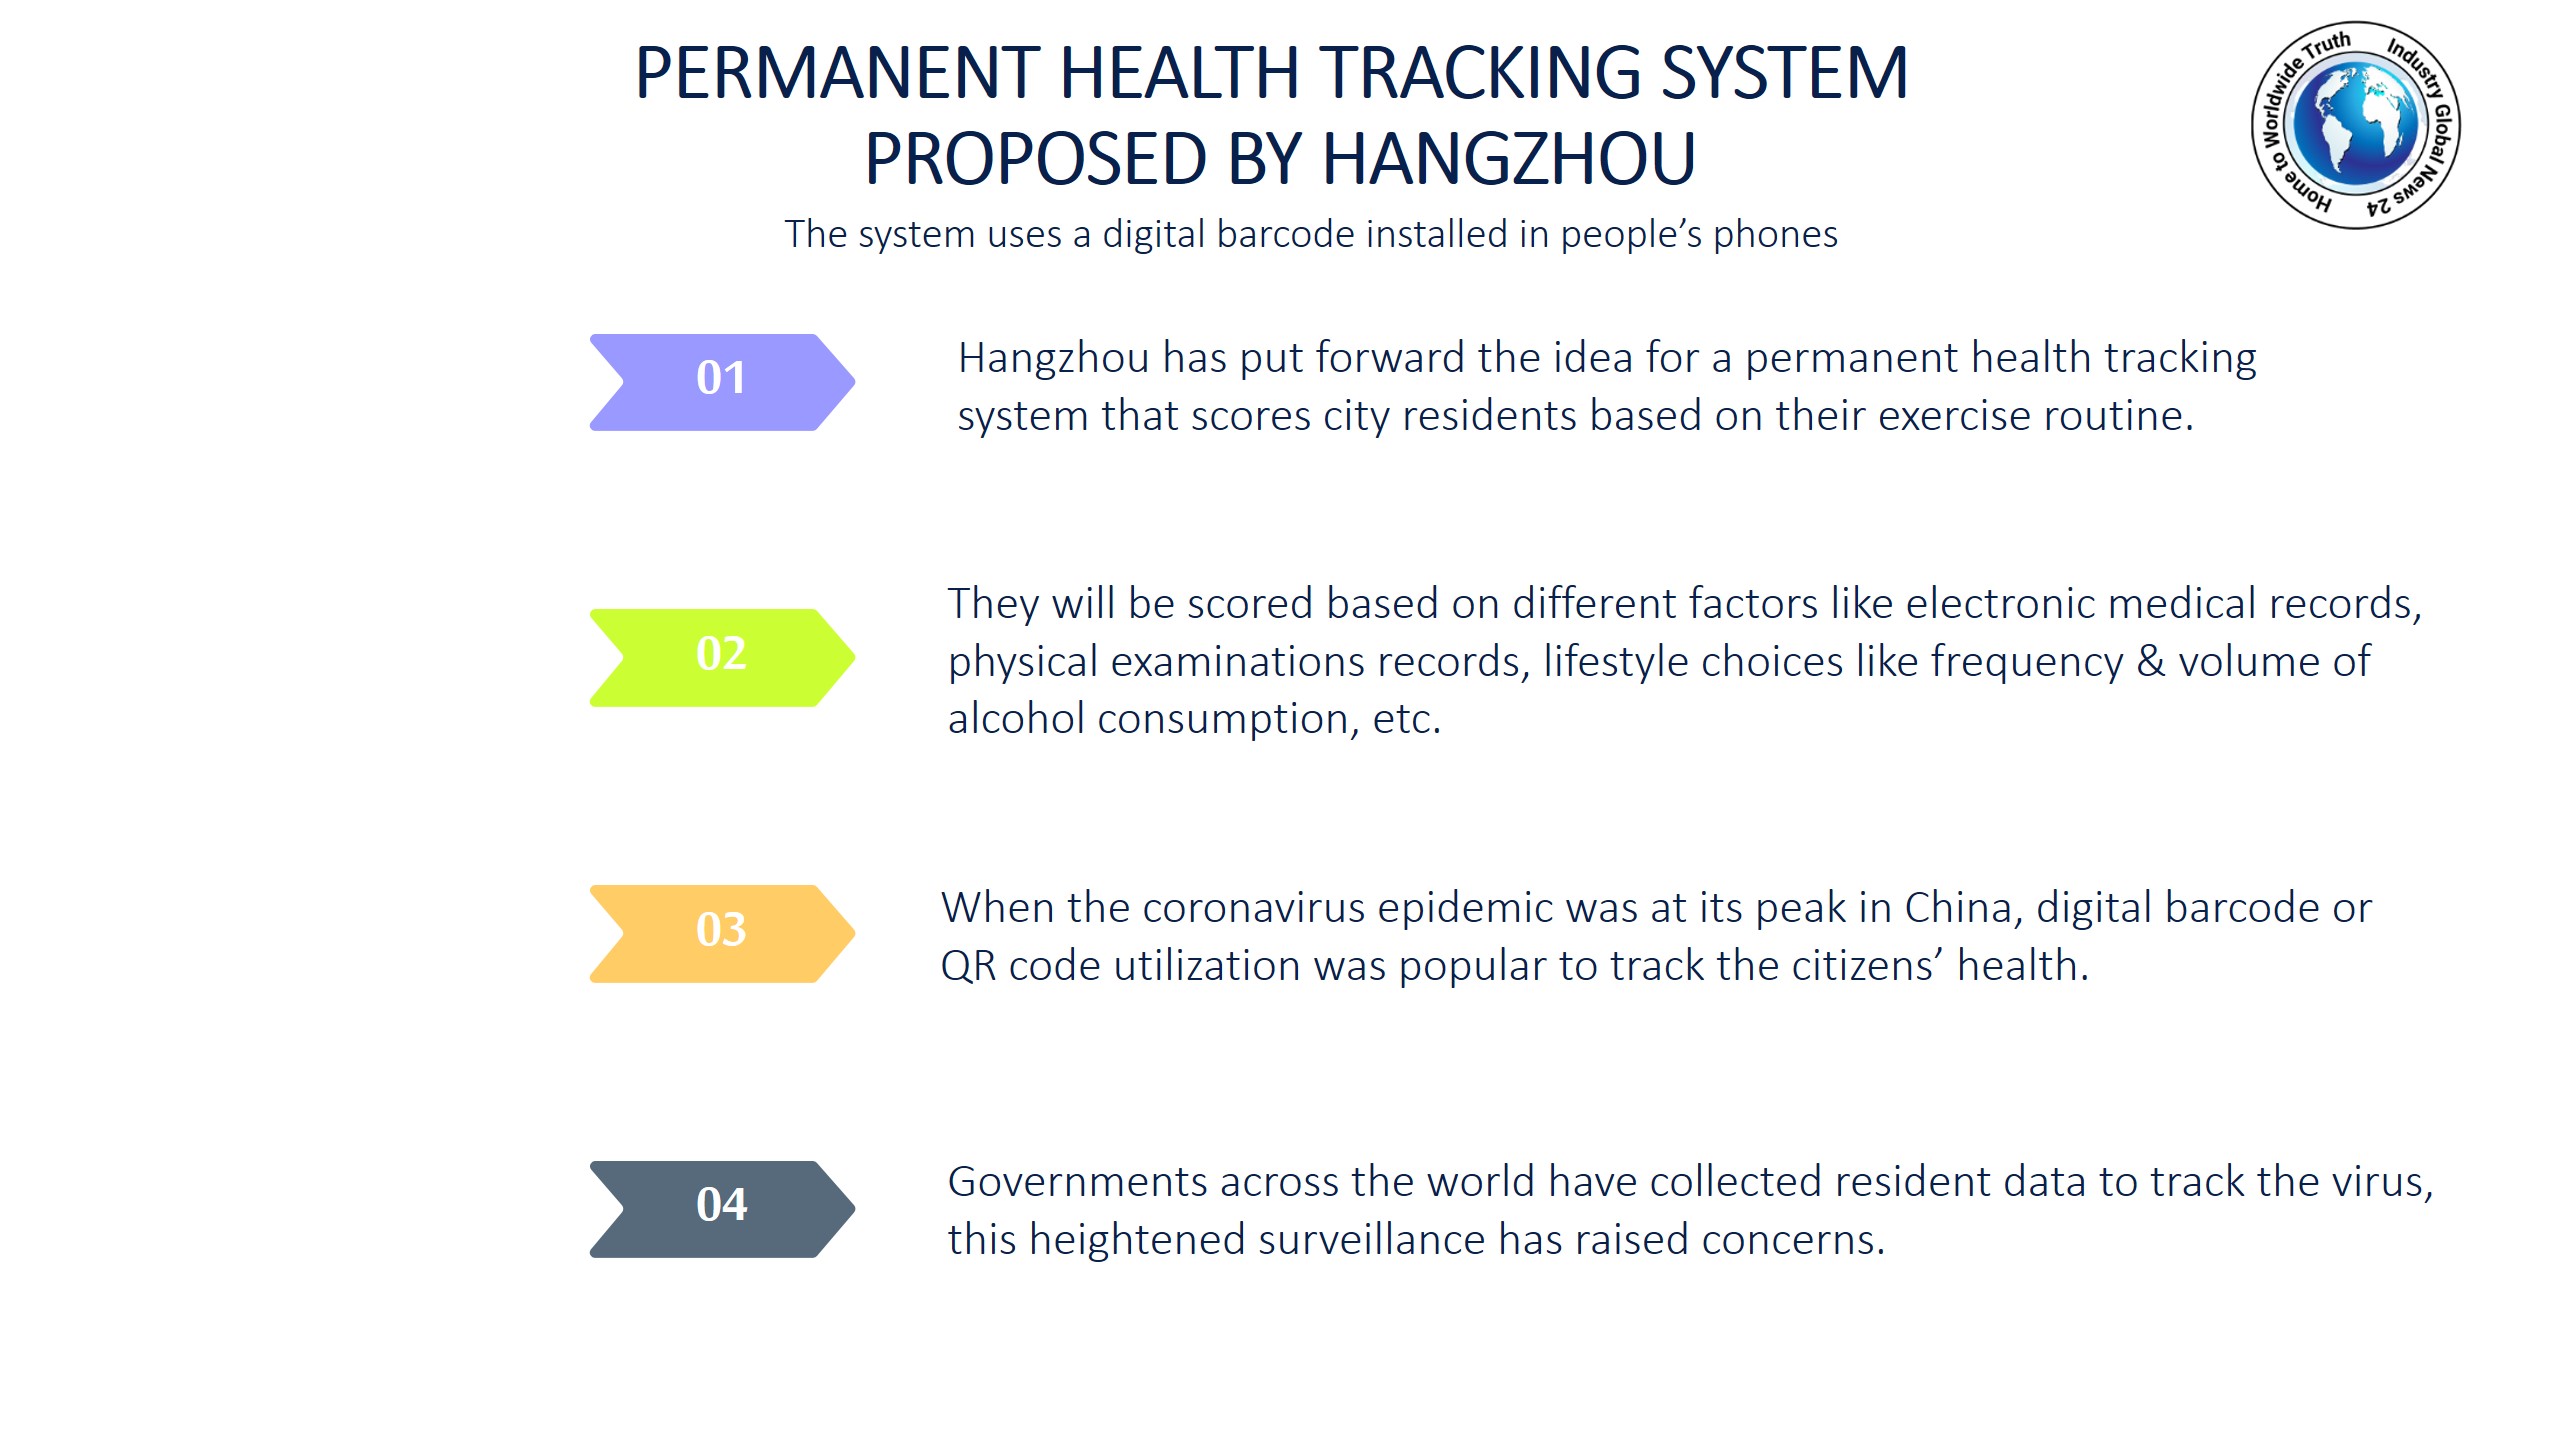 Permanent health tracking system proposed by Hangzhou